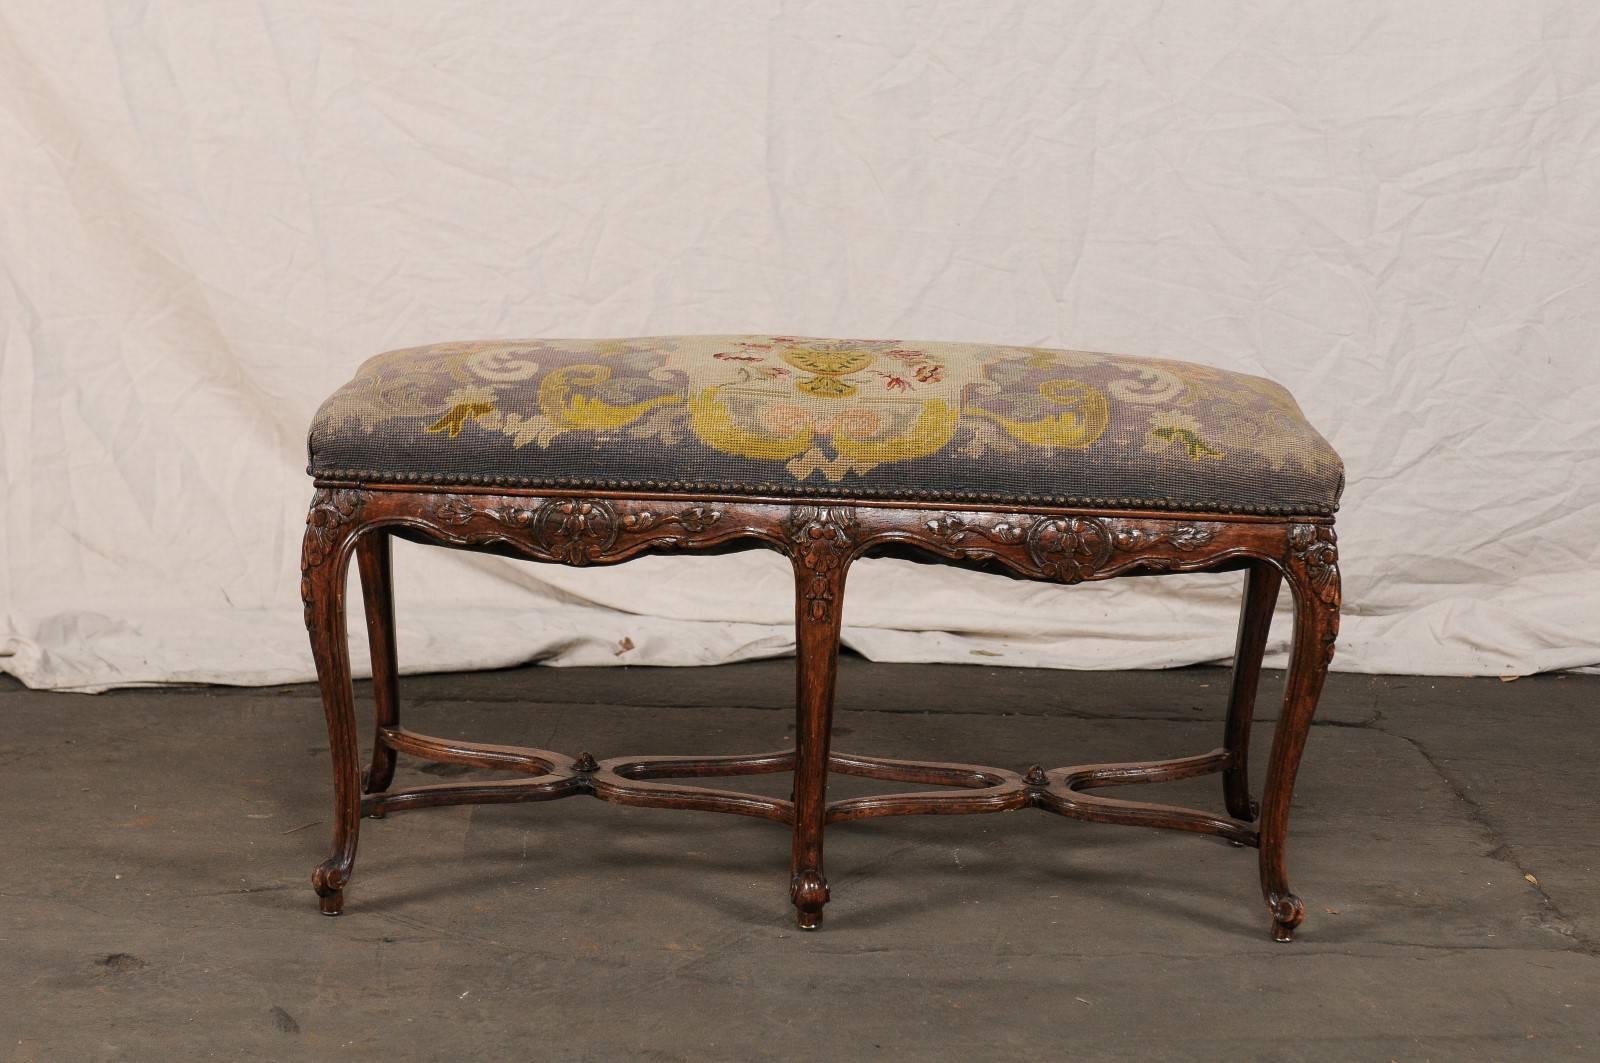 19th-20th century French Louis XV style needlepoint bench.